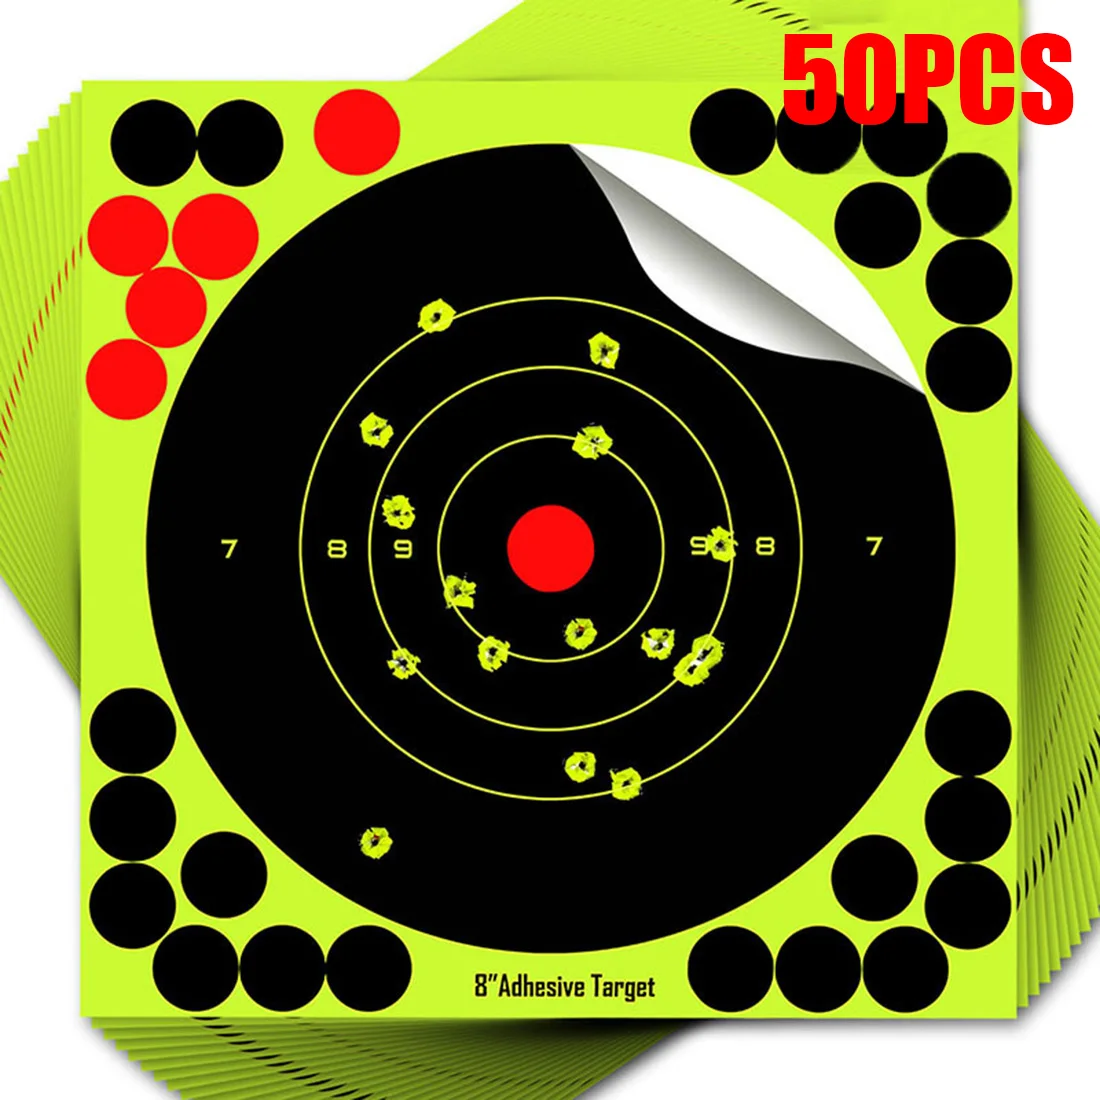 50 PCS Shooting Target Sticker Target Practice Reactive Glow Shoting Rifle Florescent Papers Paintball Accessories